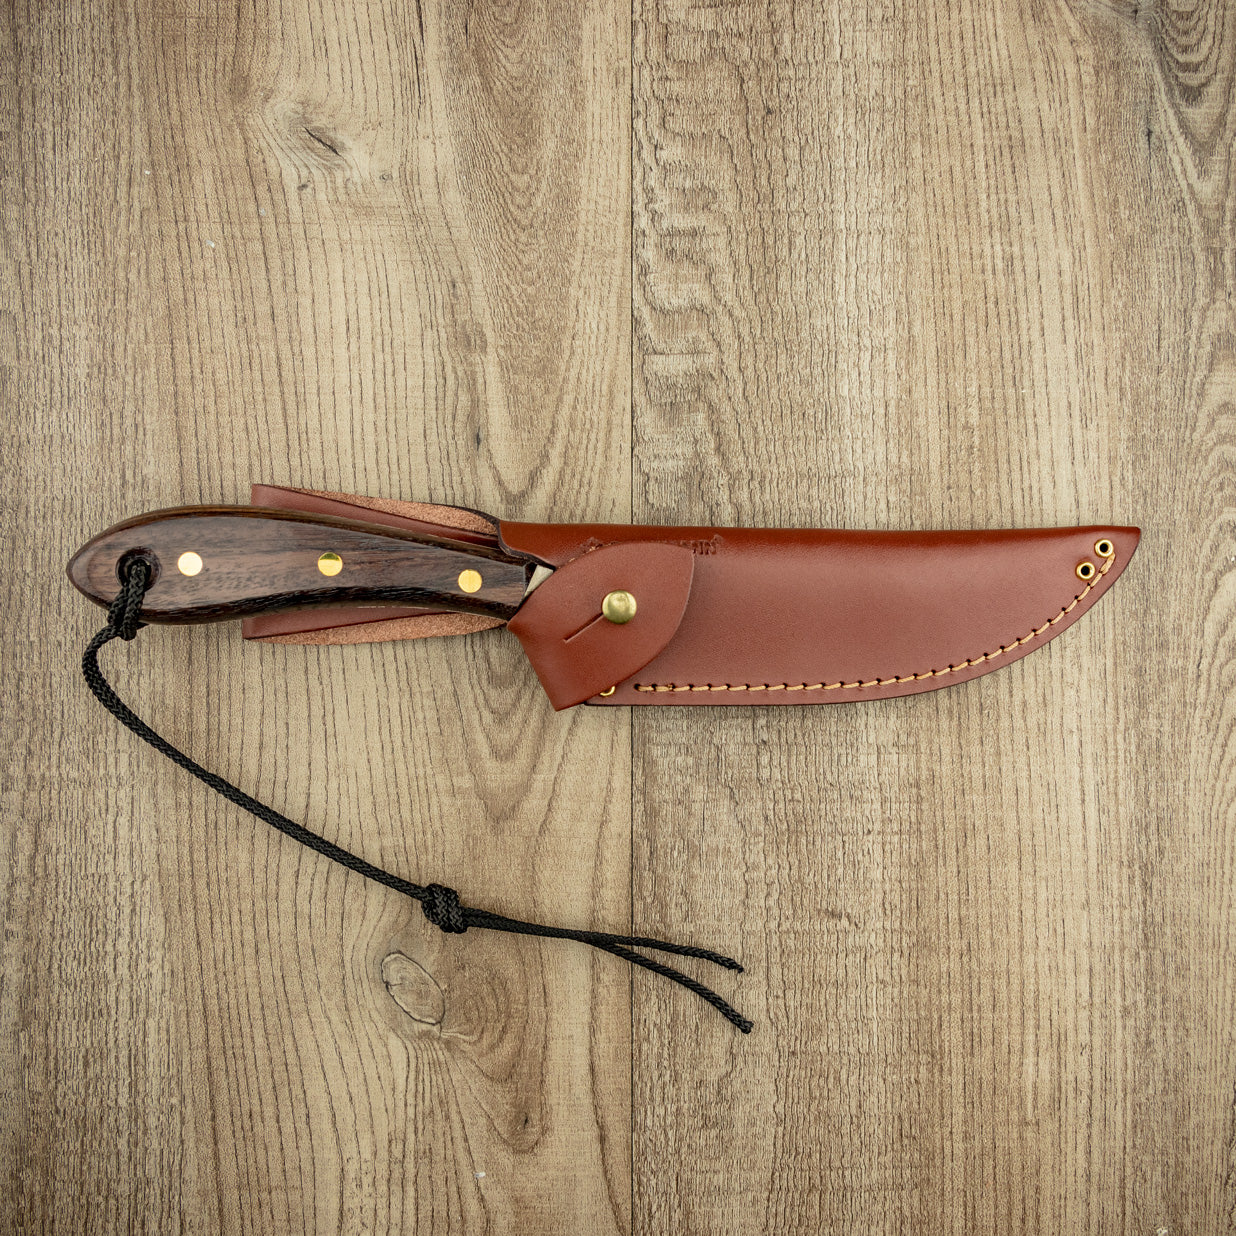 Grohmann #4 Survival Fixed Blade